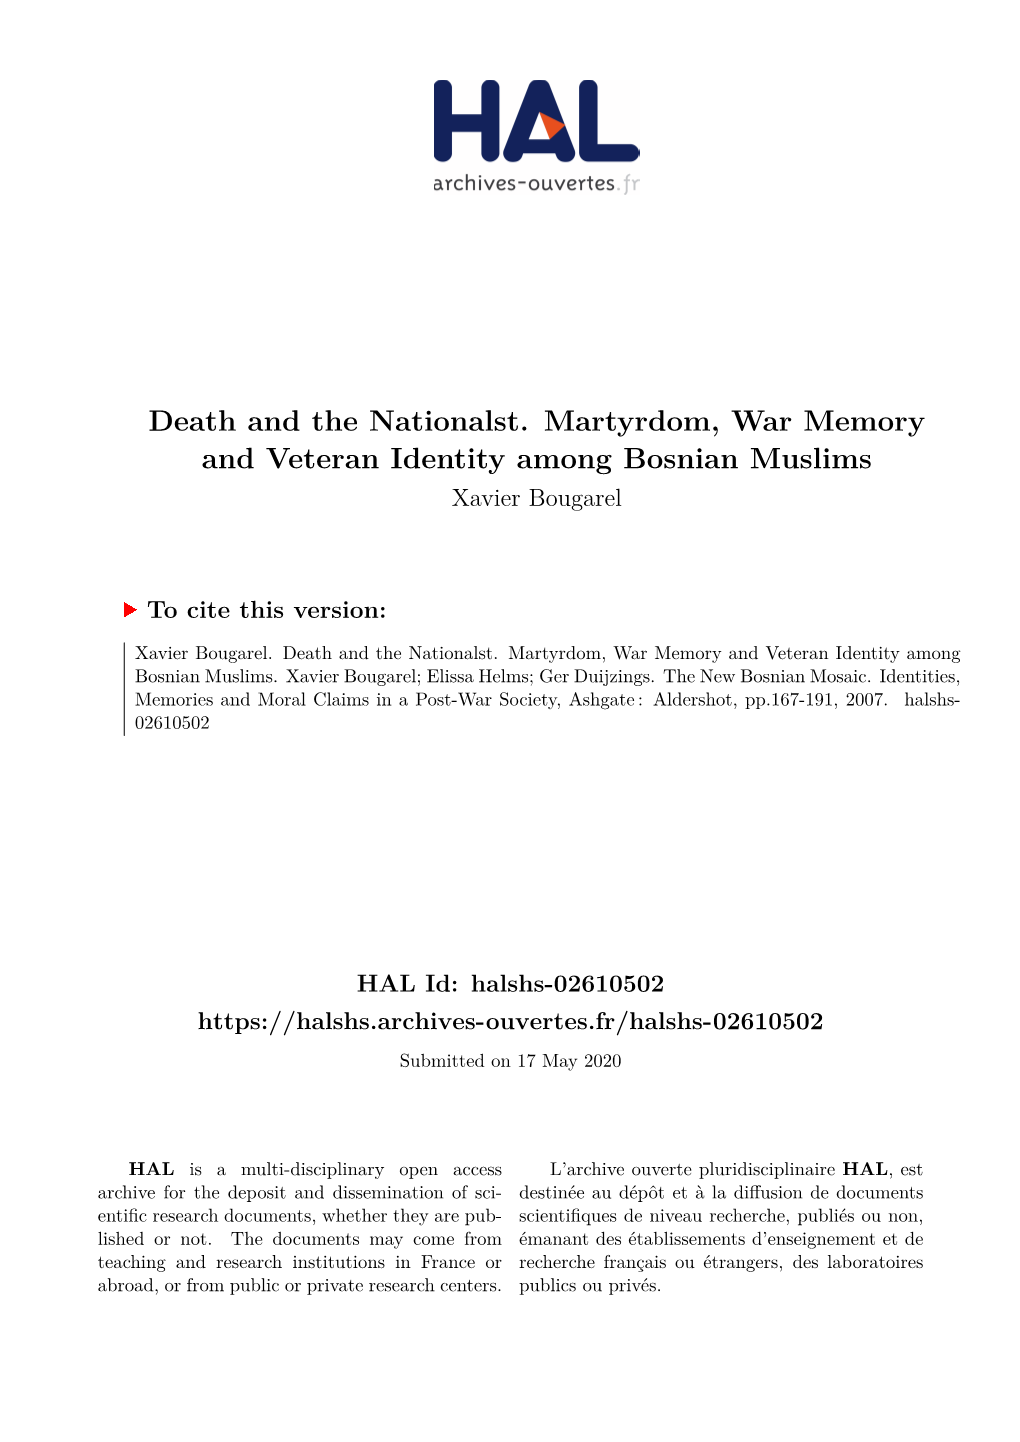 Death and the Nationalst. Martyrdom, War Memory and Veteran Identity Among Bosnian Muslims Xavier Bougarel